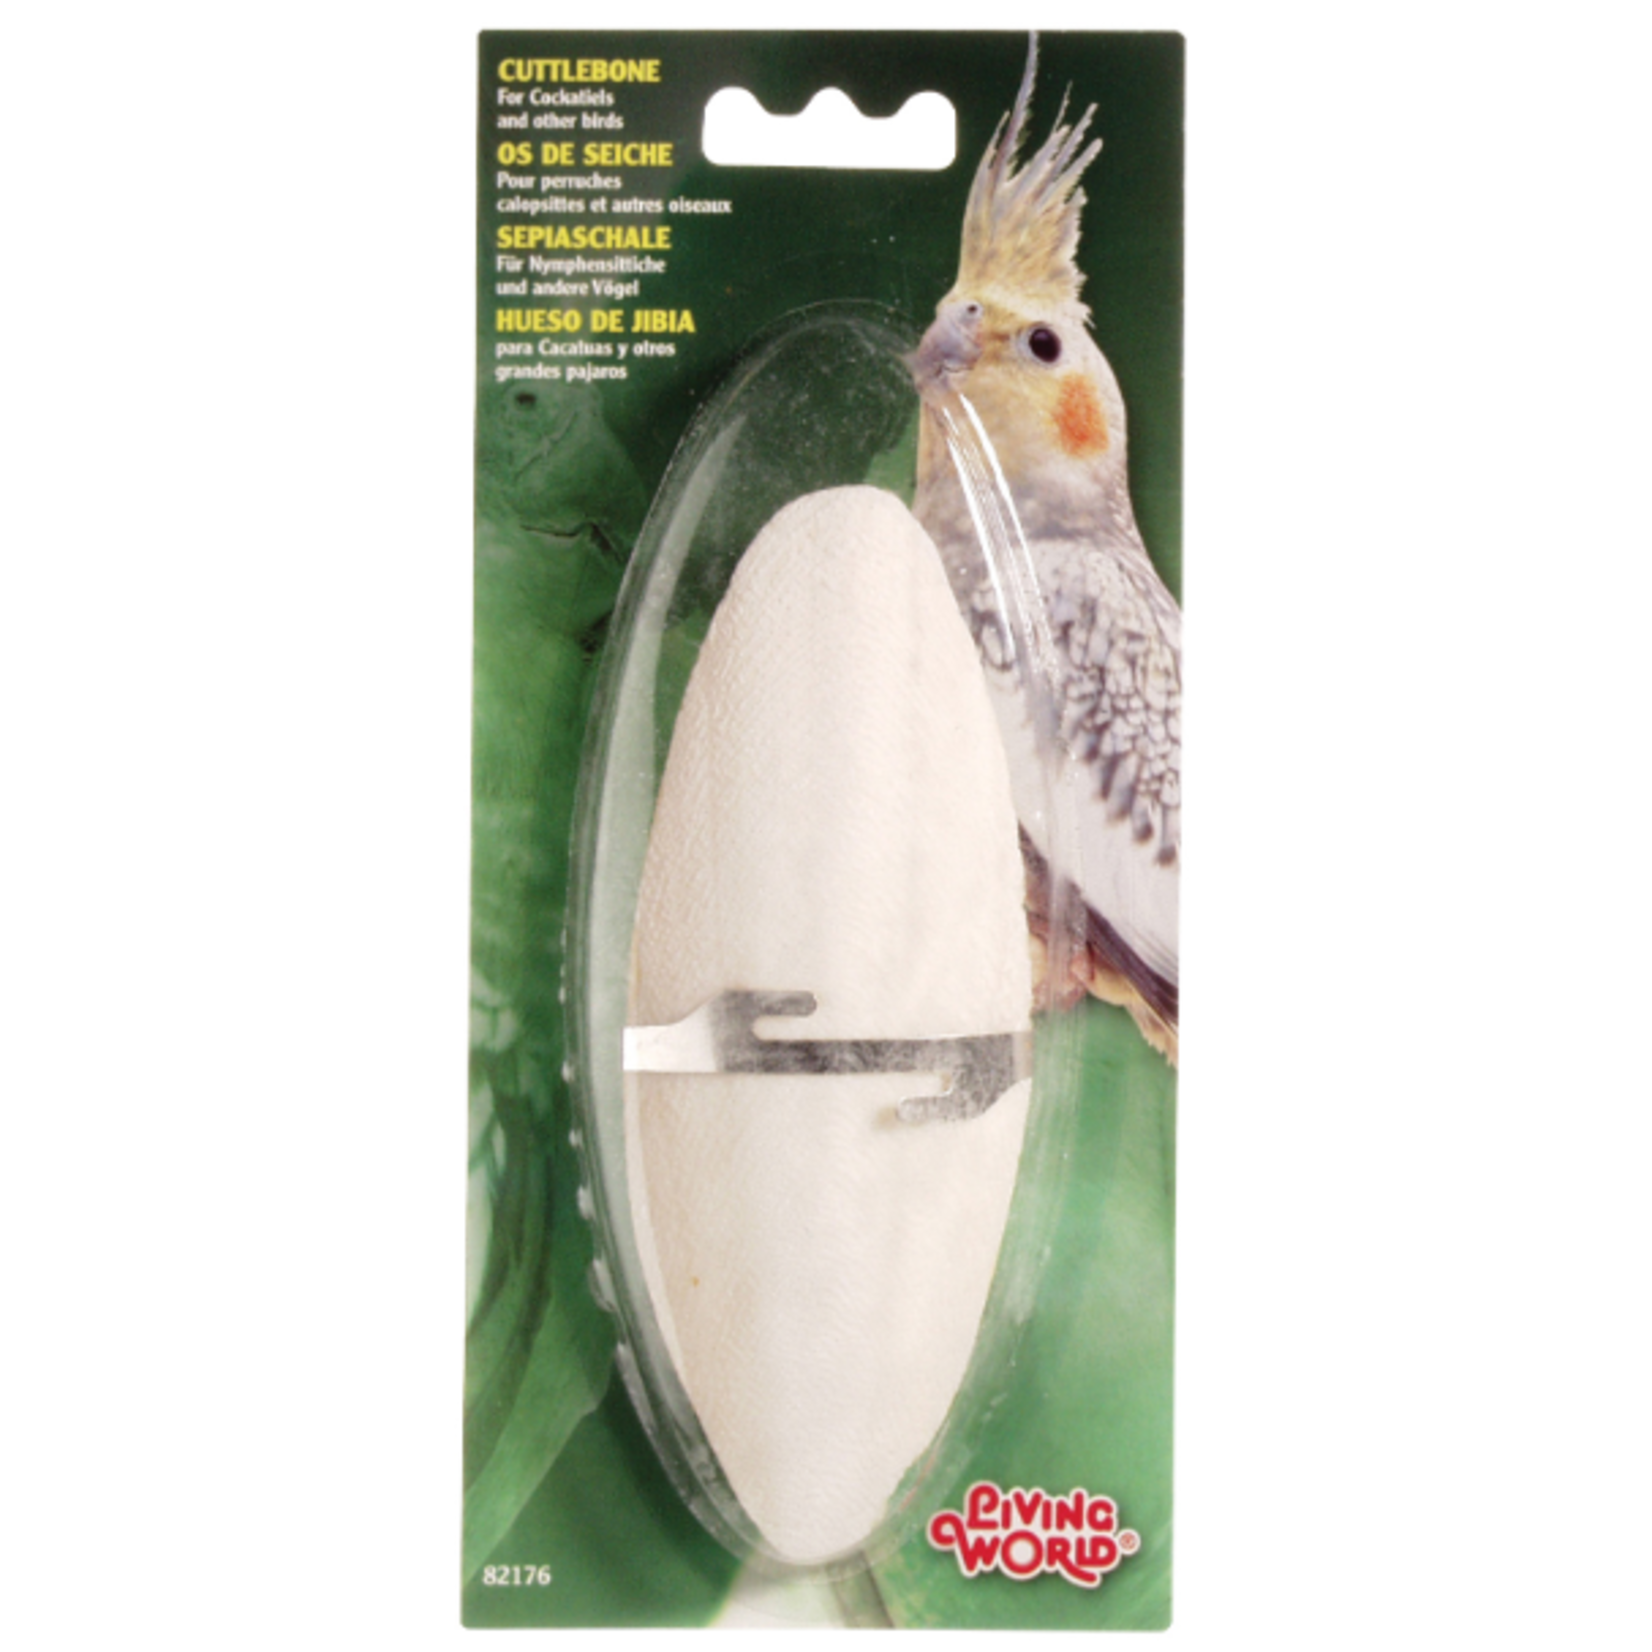 Living World Cuttlebone with Holder - Large - 6 to 7 in